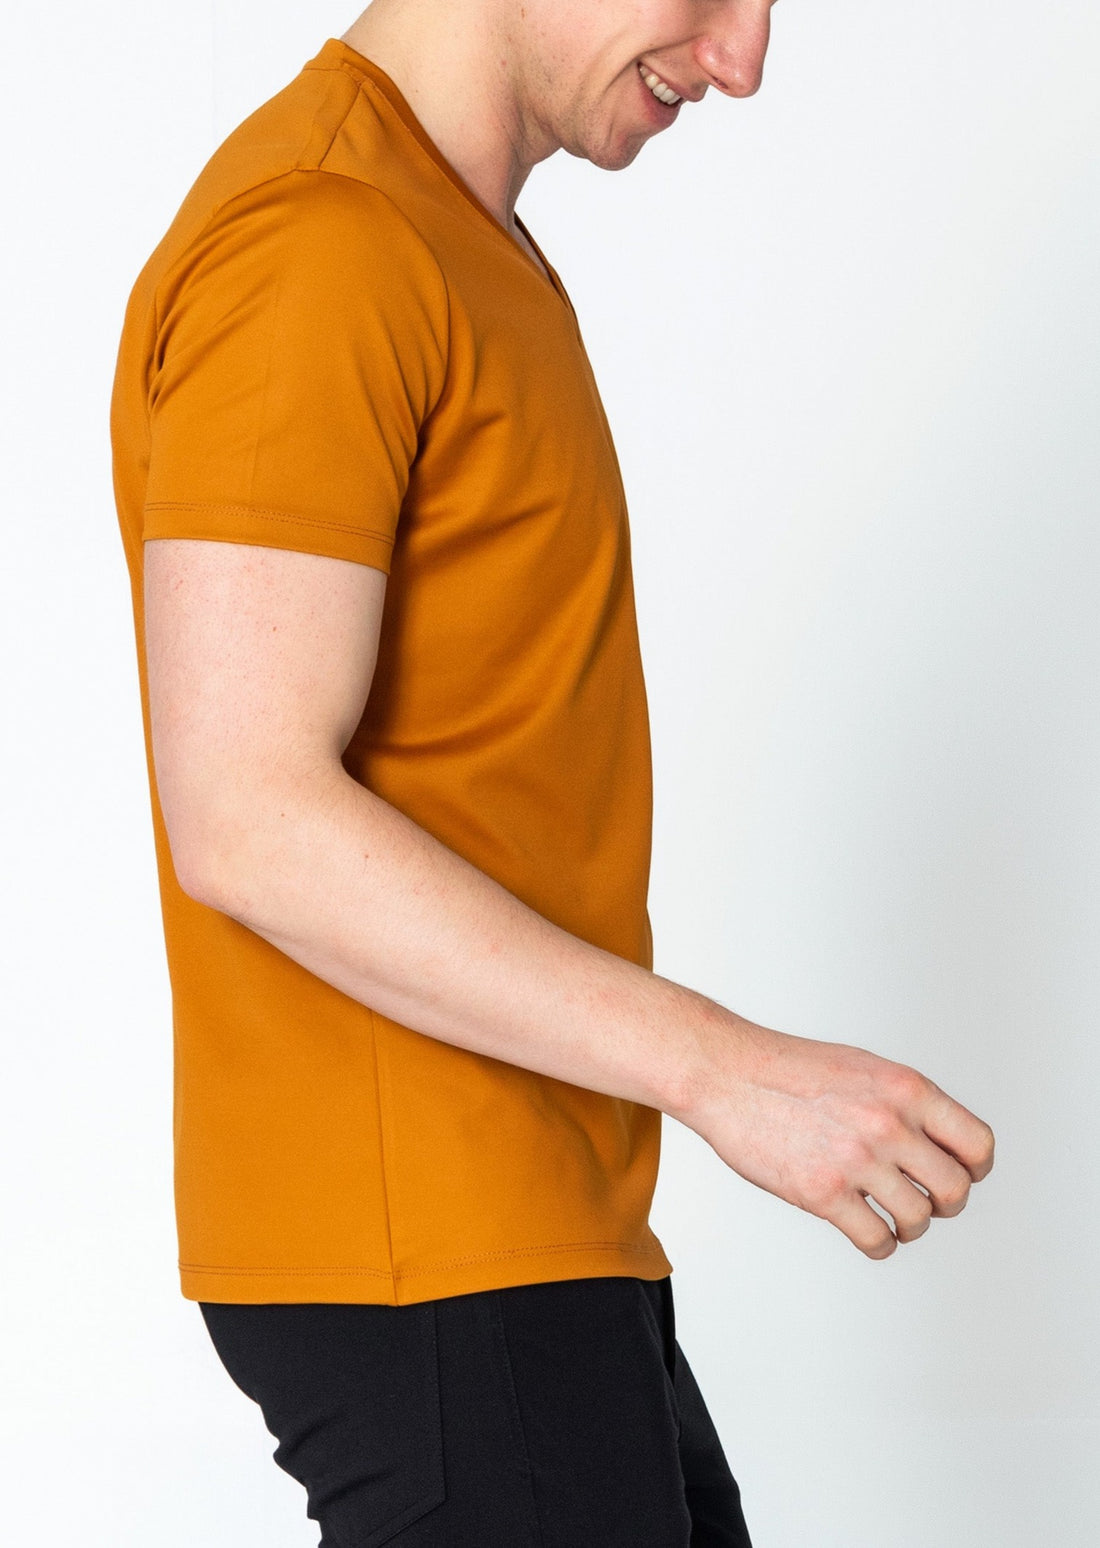 V-neck Fitted Sleeves T-shirt - Mustard